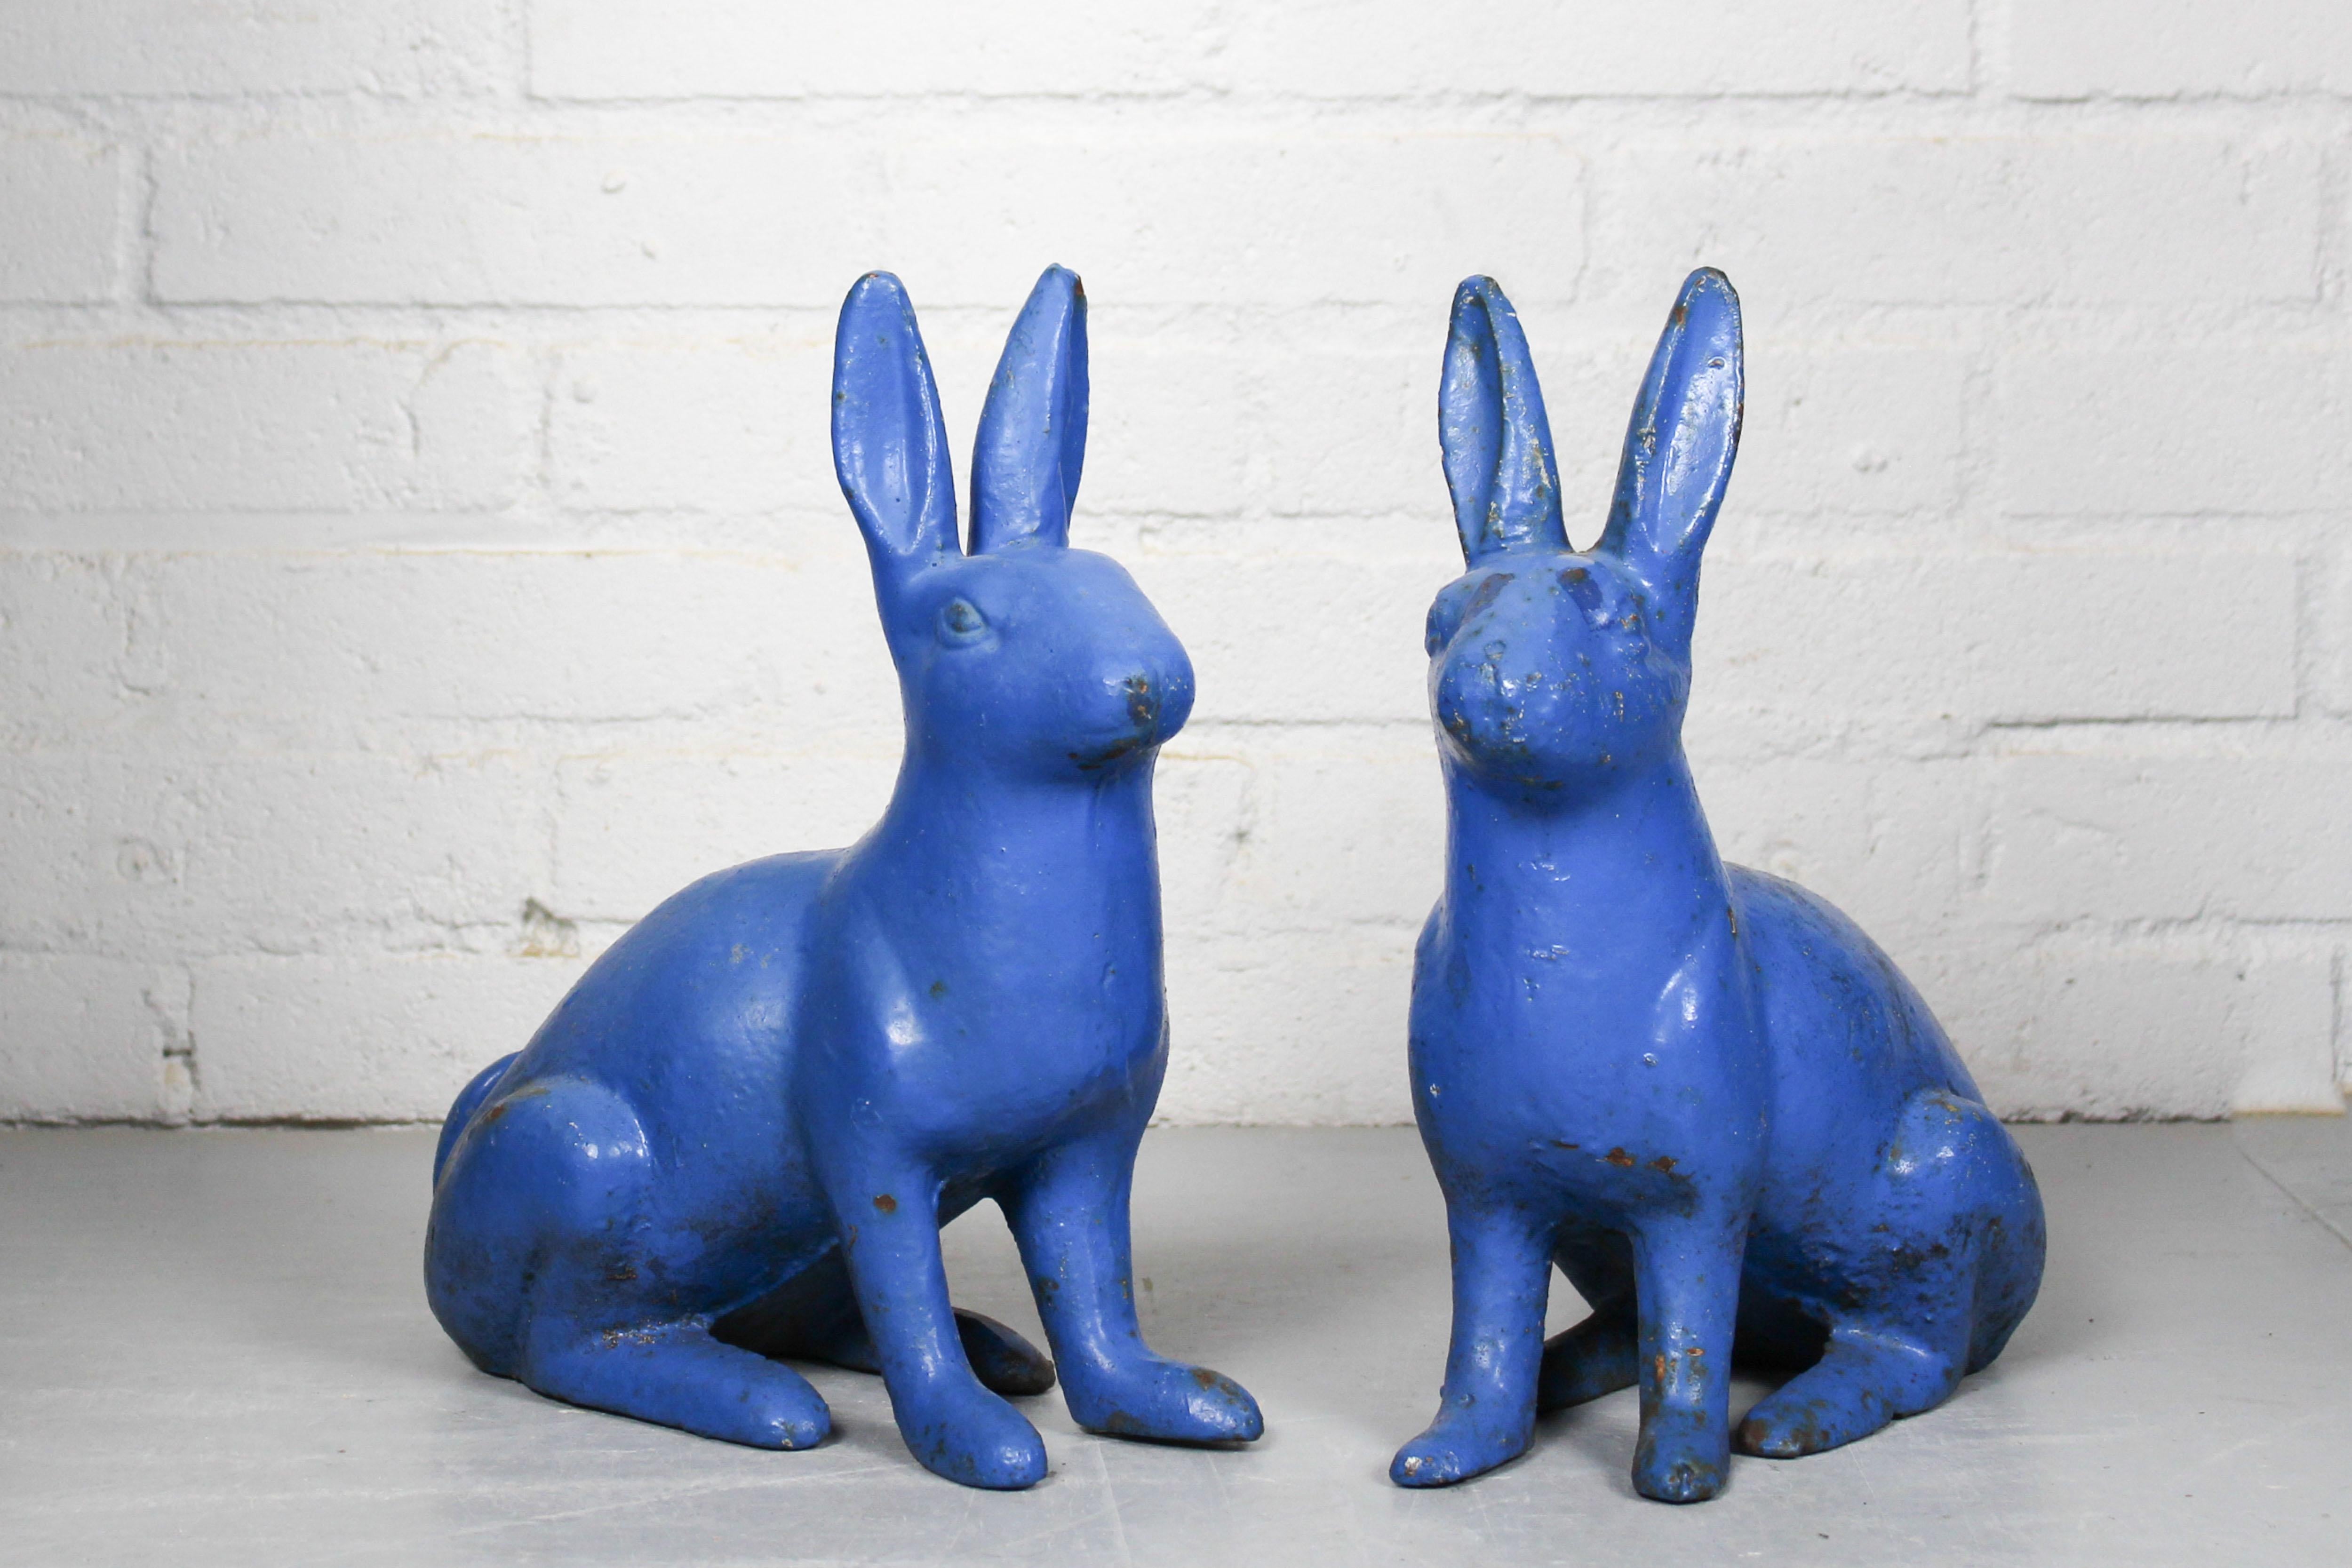 A pair of cast iron antique doorstops in the form of seated blue rabbits, reminiscent of Easter bunnies (bunny), produced around 1890.  

Dimensions: Each rabbit is 14cm w, 26cm l and 28,5cm h. 
